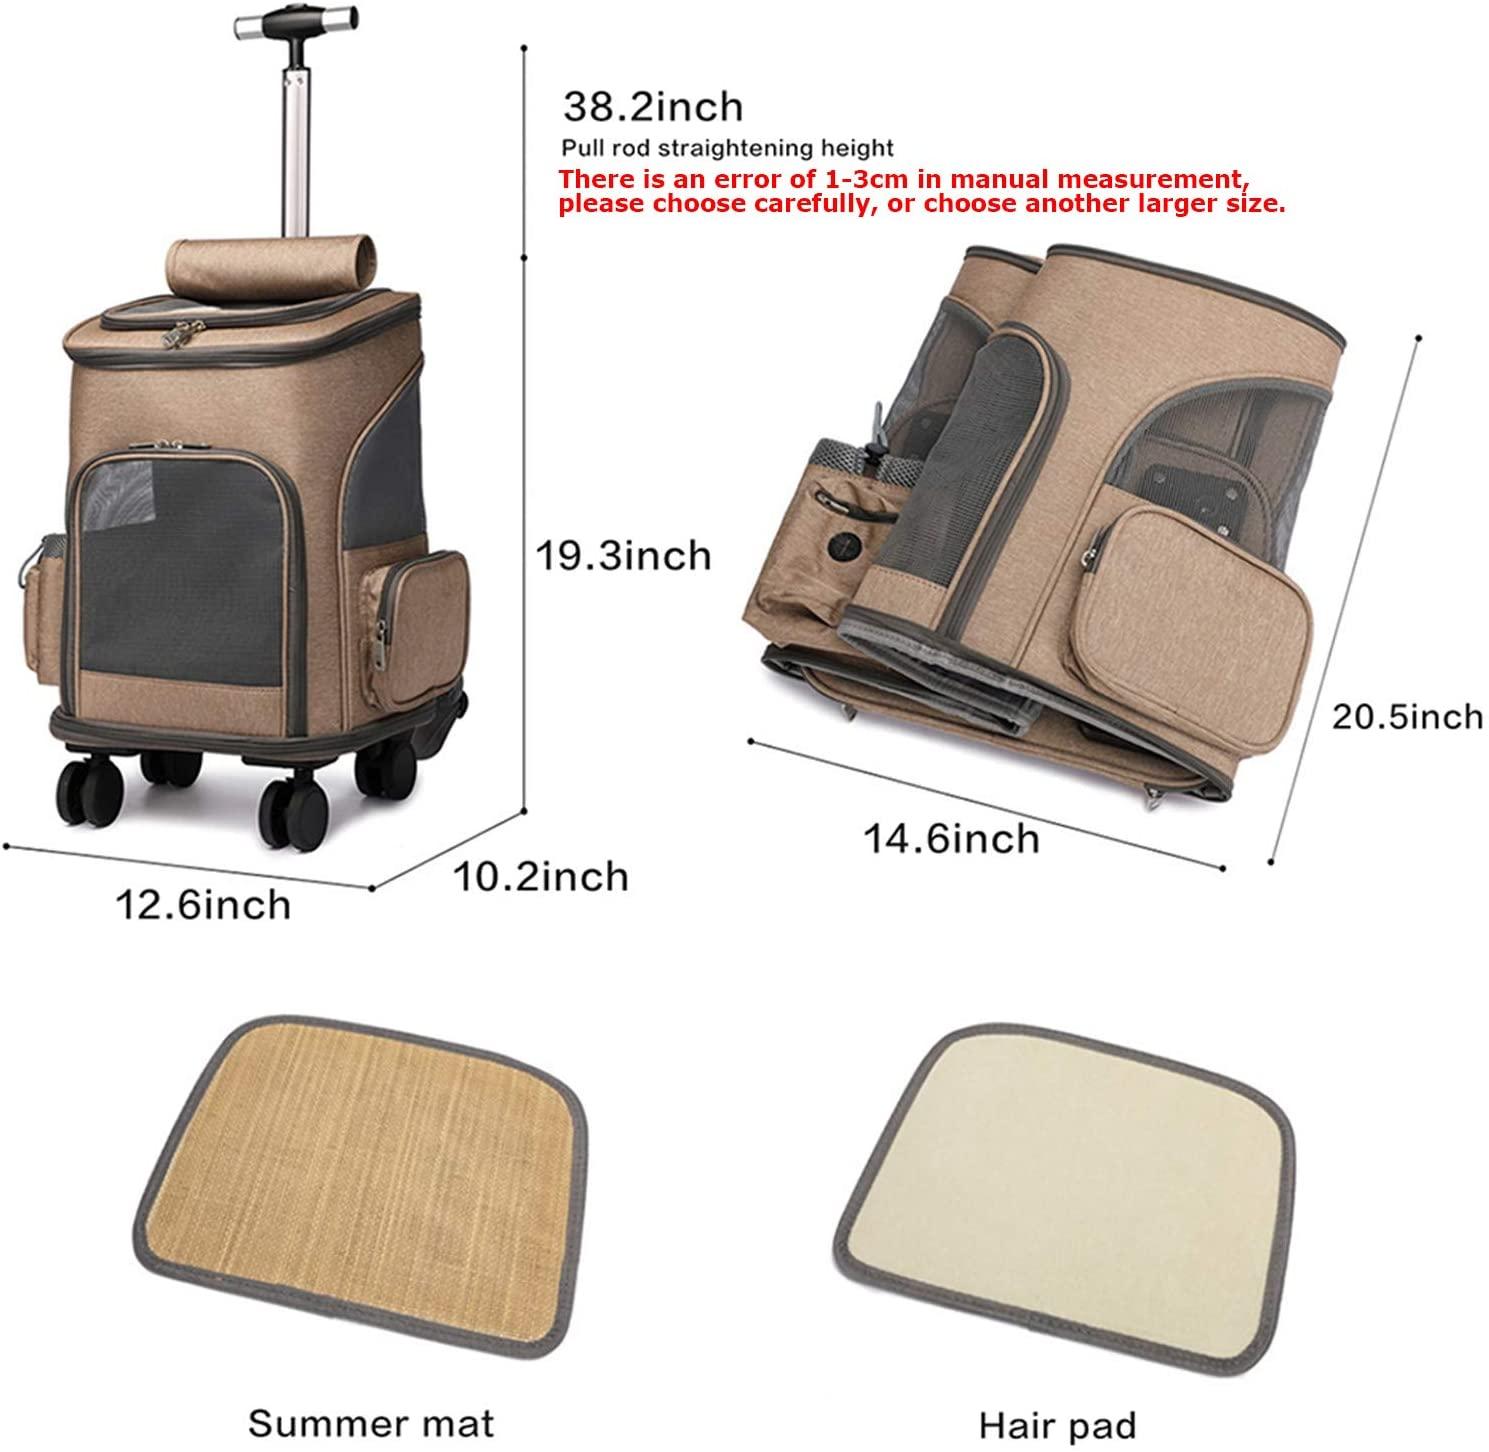 FREE SAMPLE Wheeled Pet Carrier Backpack Pet Stroller Travel Carrier Car Seat for Dogs Cats Puppy Comfort Cat Backpack